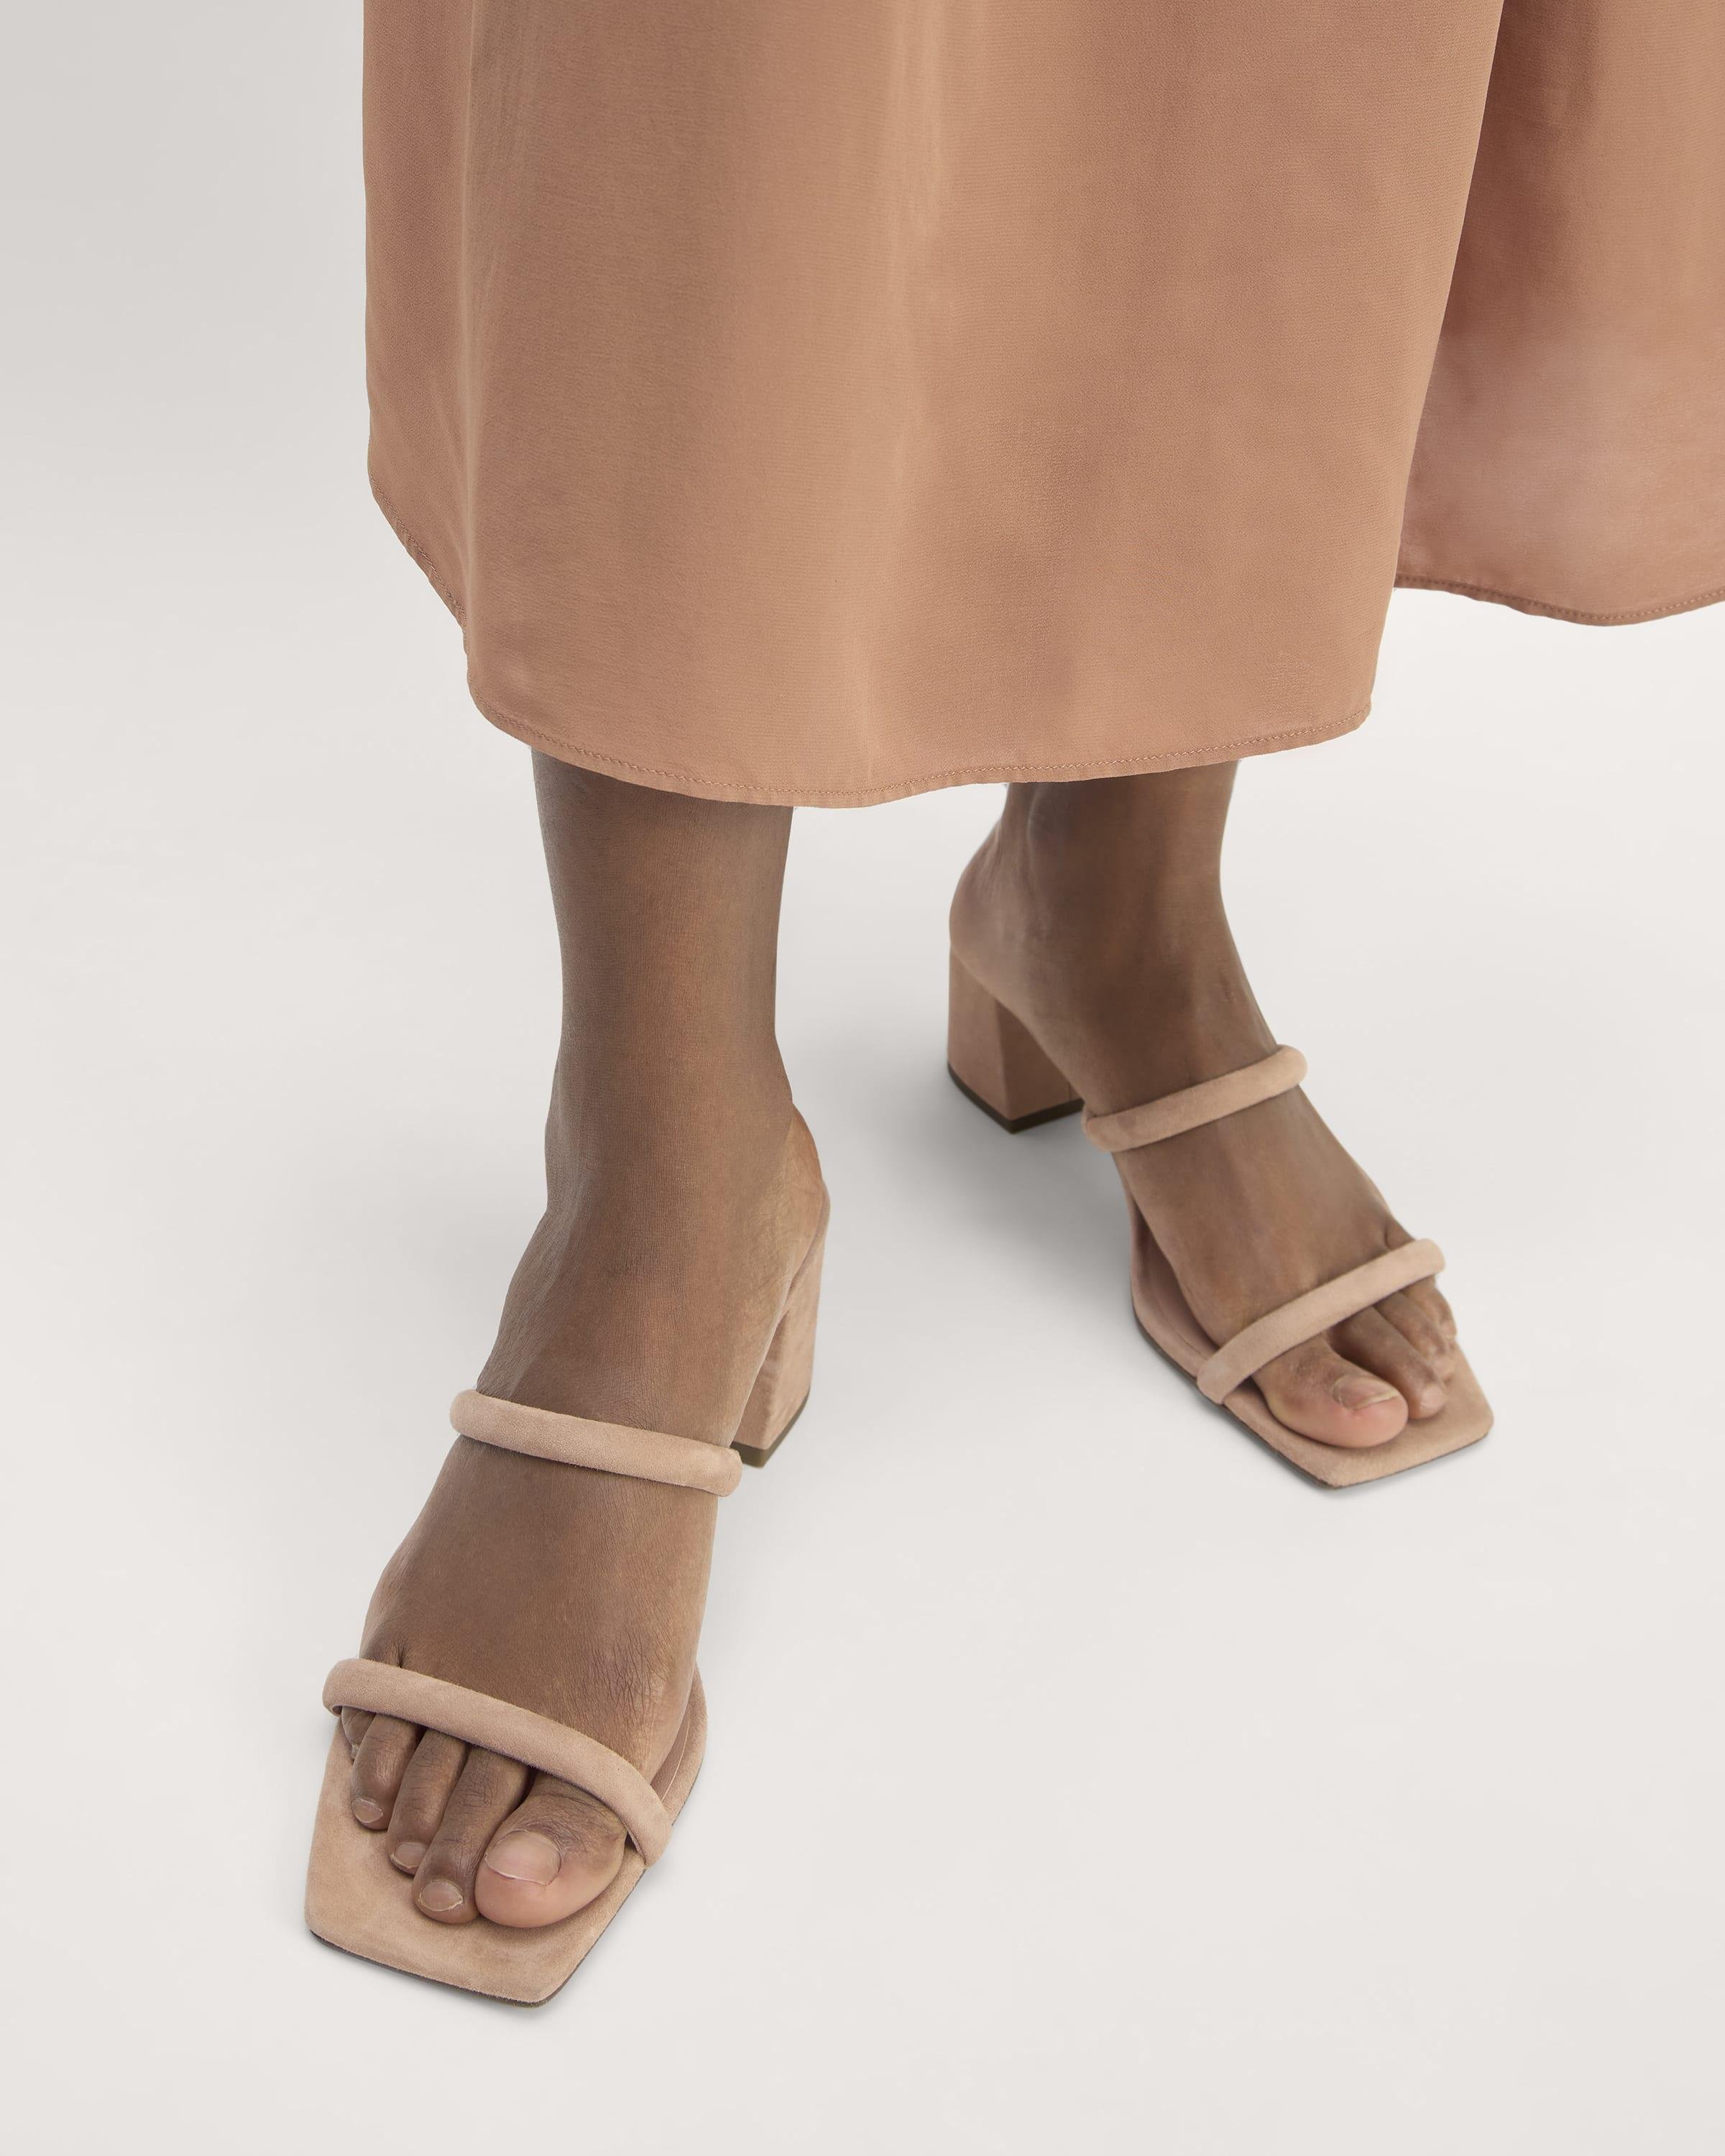 The Double Strap Heel by EVERLANE